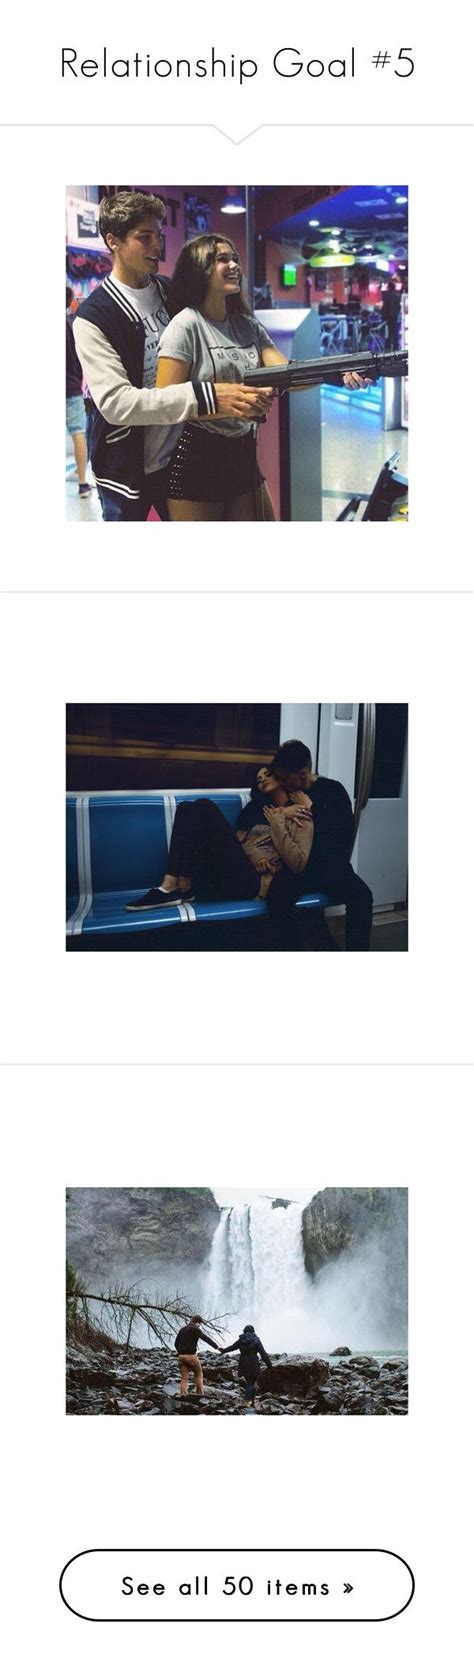 Relationship Goal 5 By Fiction 928 Liked On Polyvore Featuring